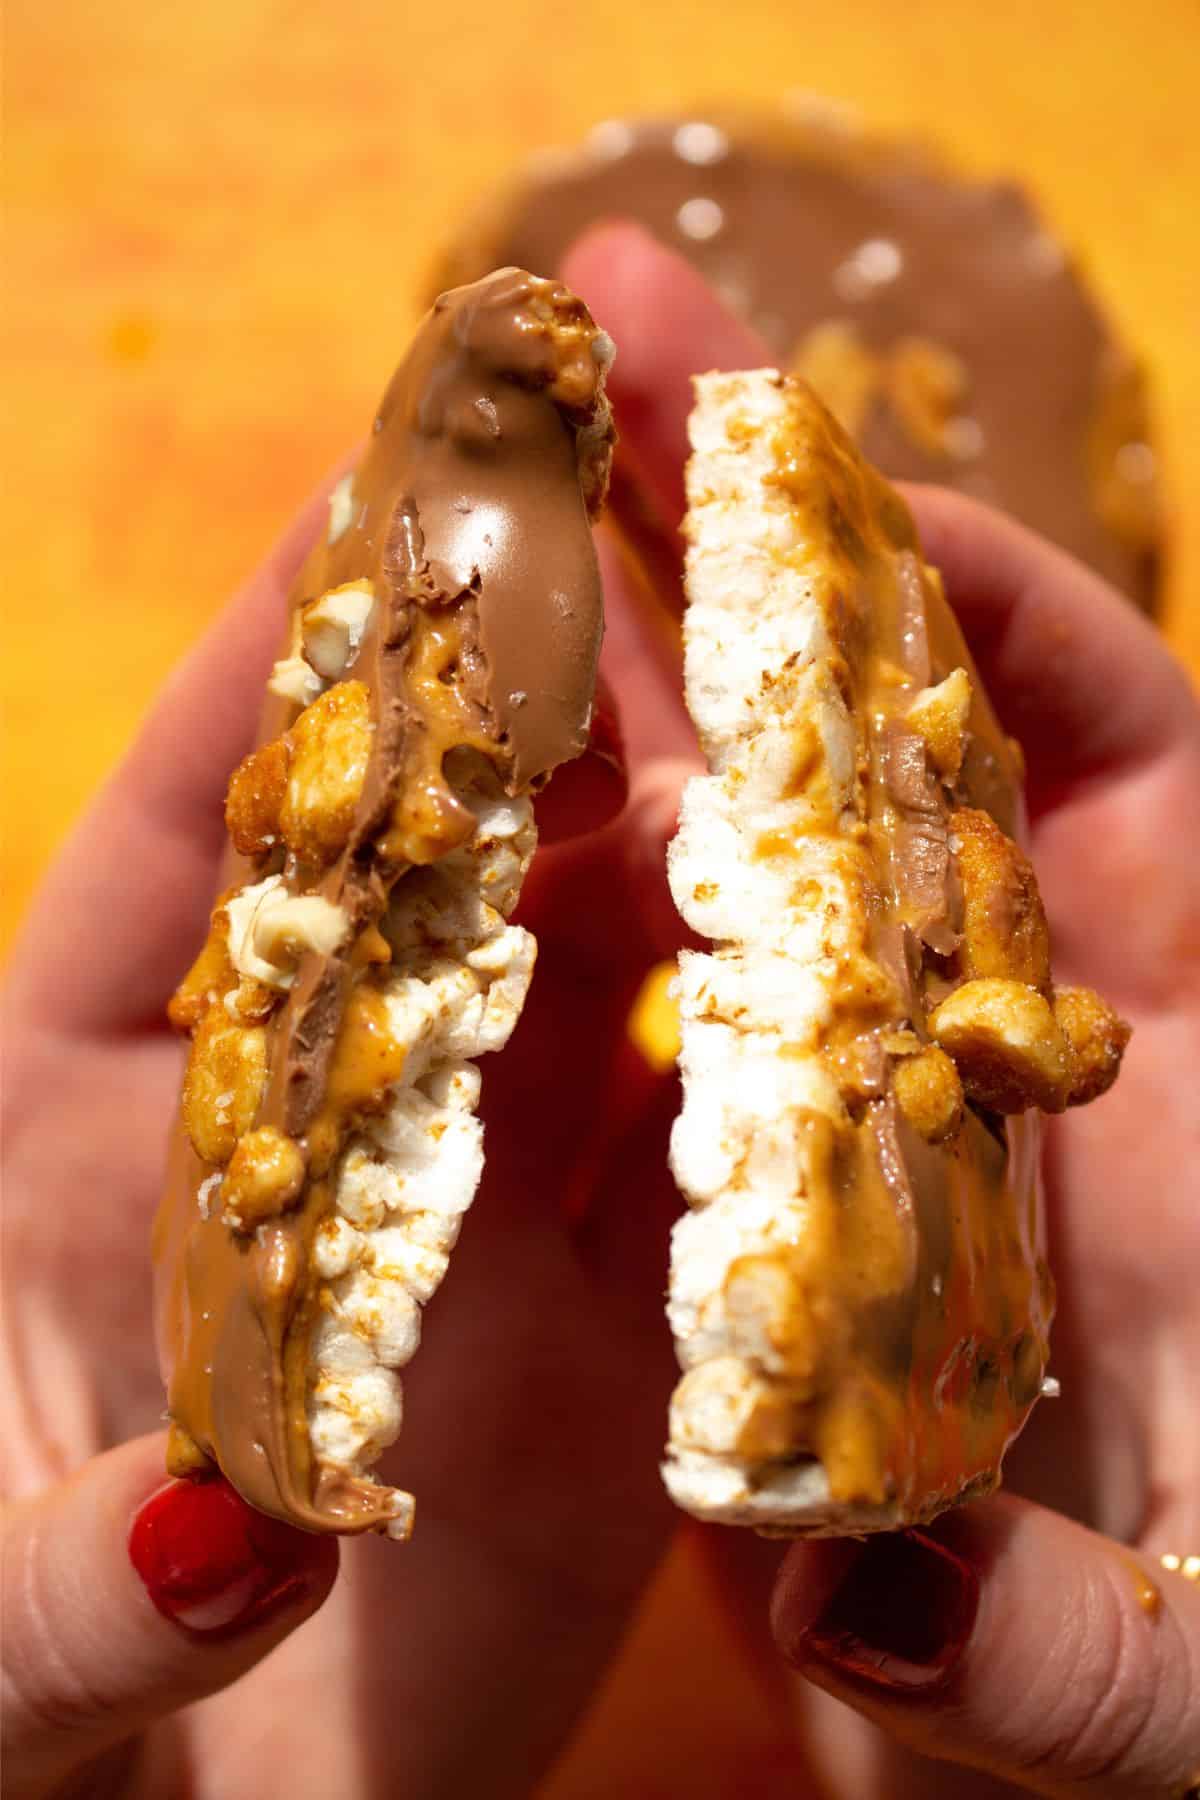 Rice cake broken in half and held with 2 hands to show the chocolate and peanut butter filling.